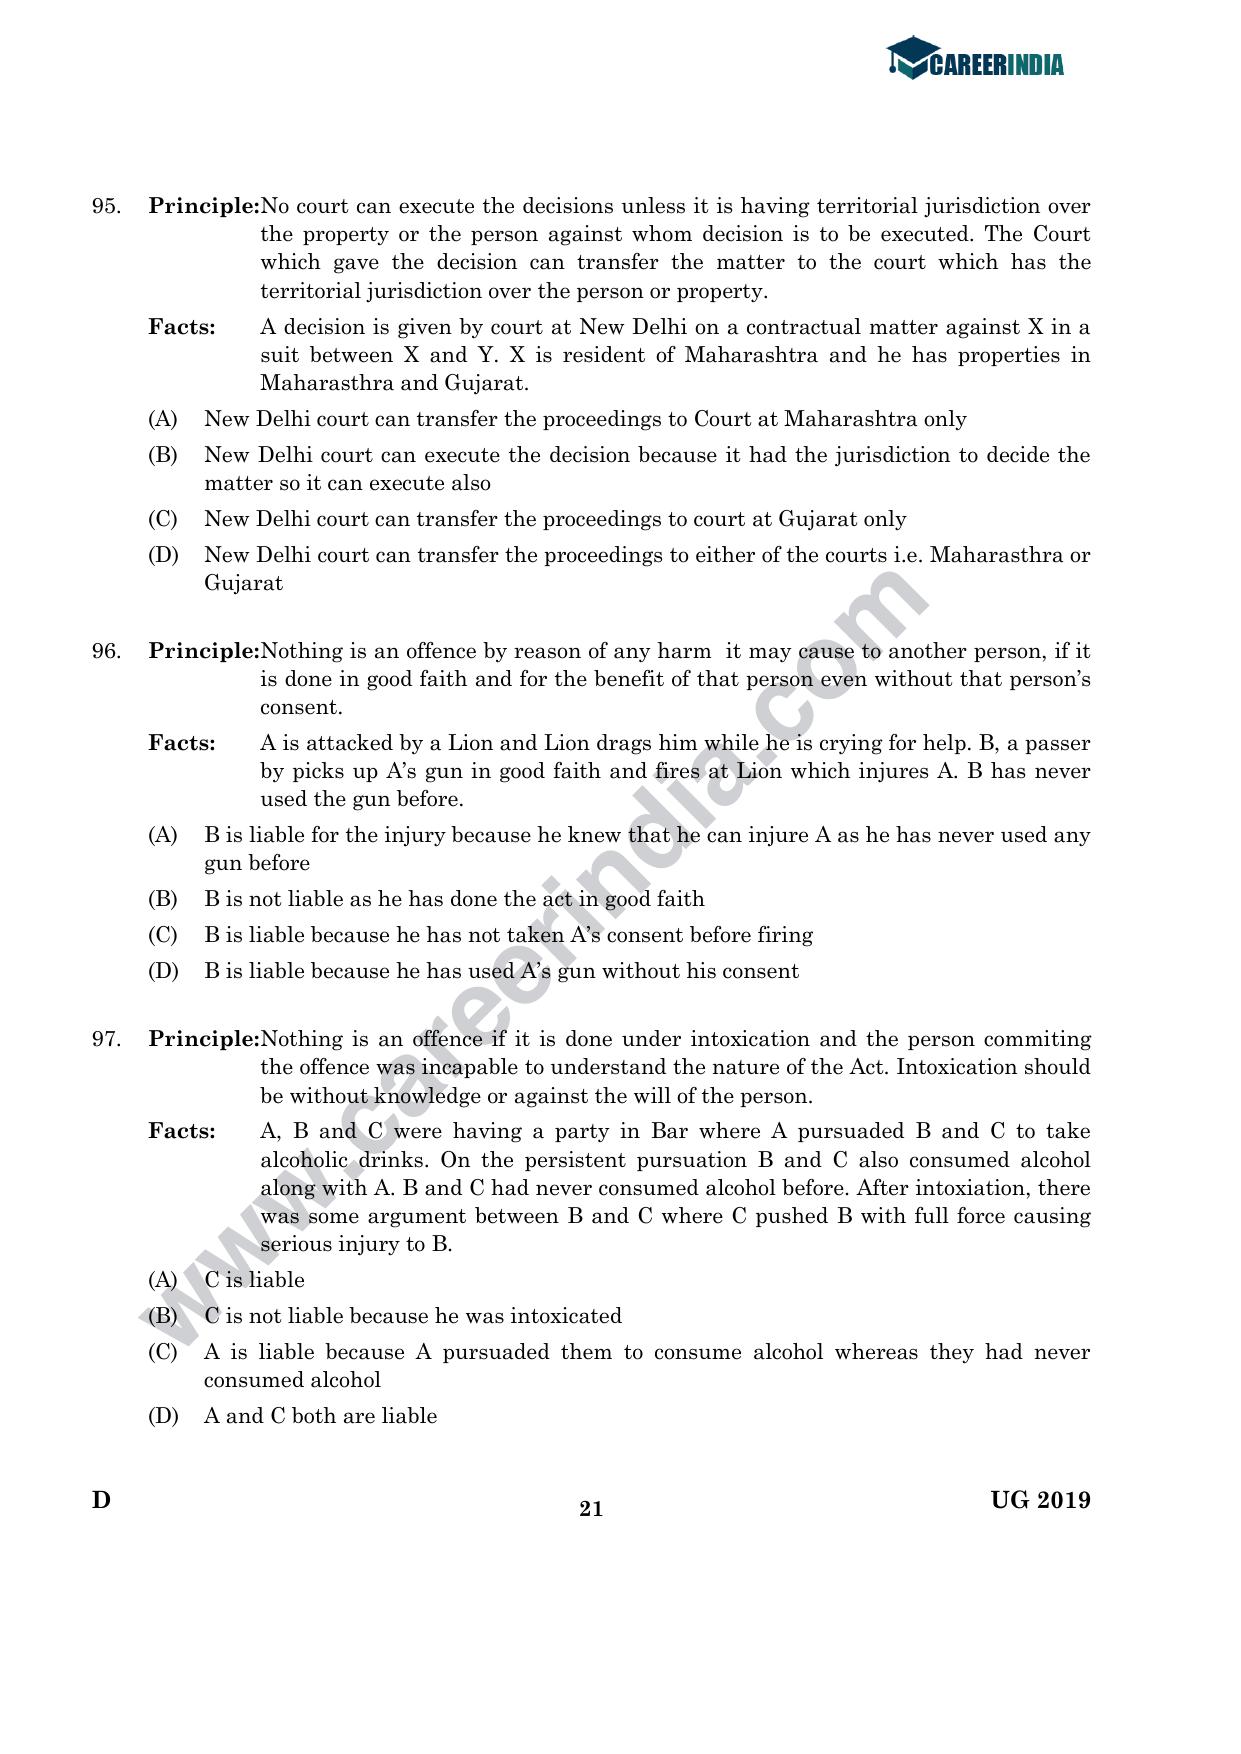 CLAT 2019 UG Logical-Reasoning Question Paper - Page 20